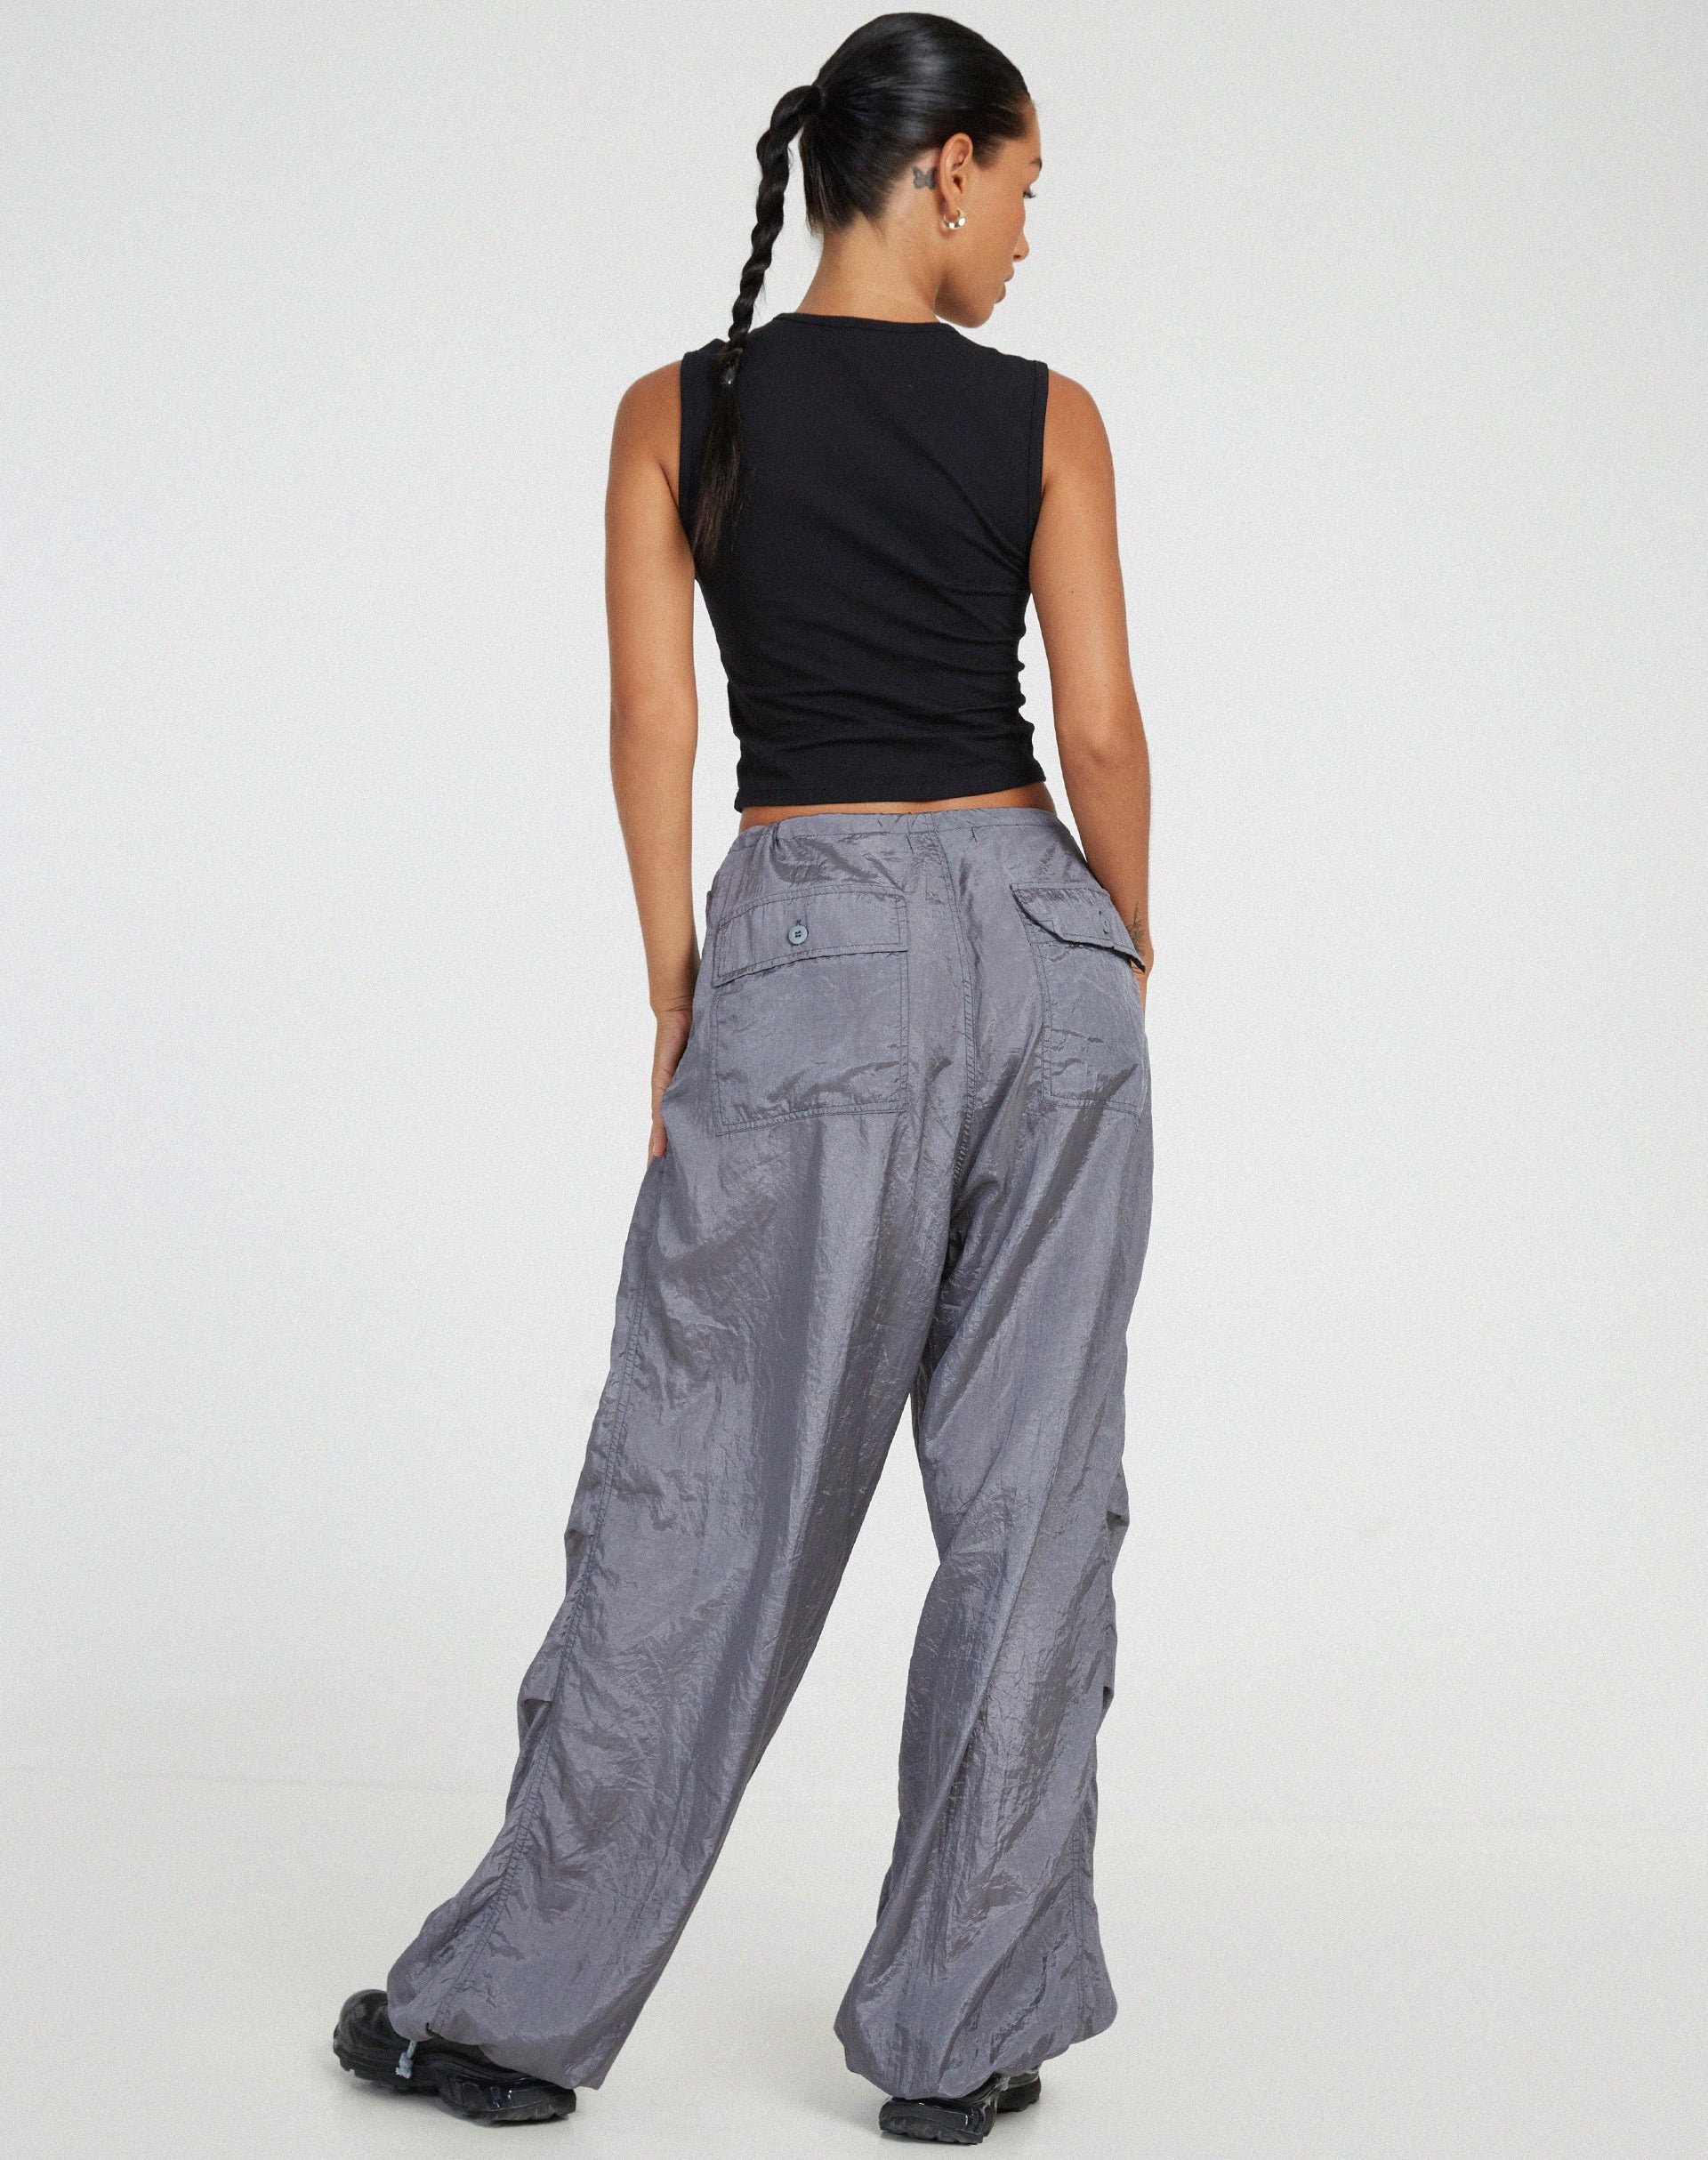 image of Chute Trouser in Parachute Cool Grey